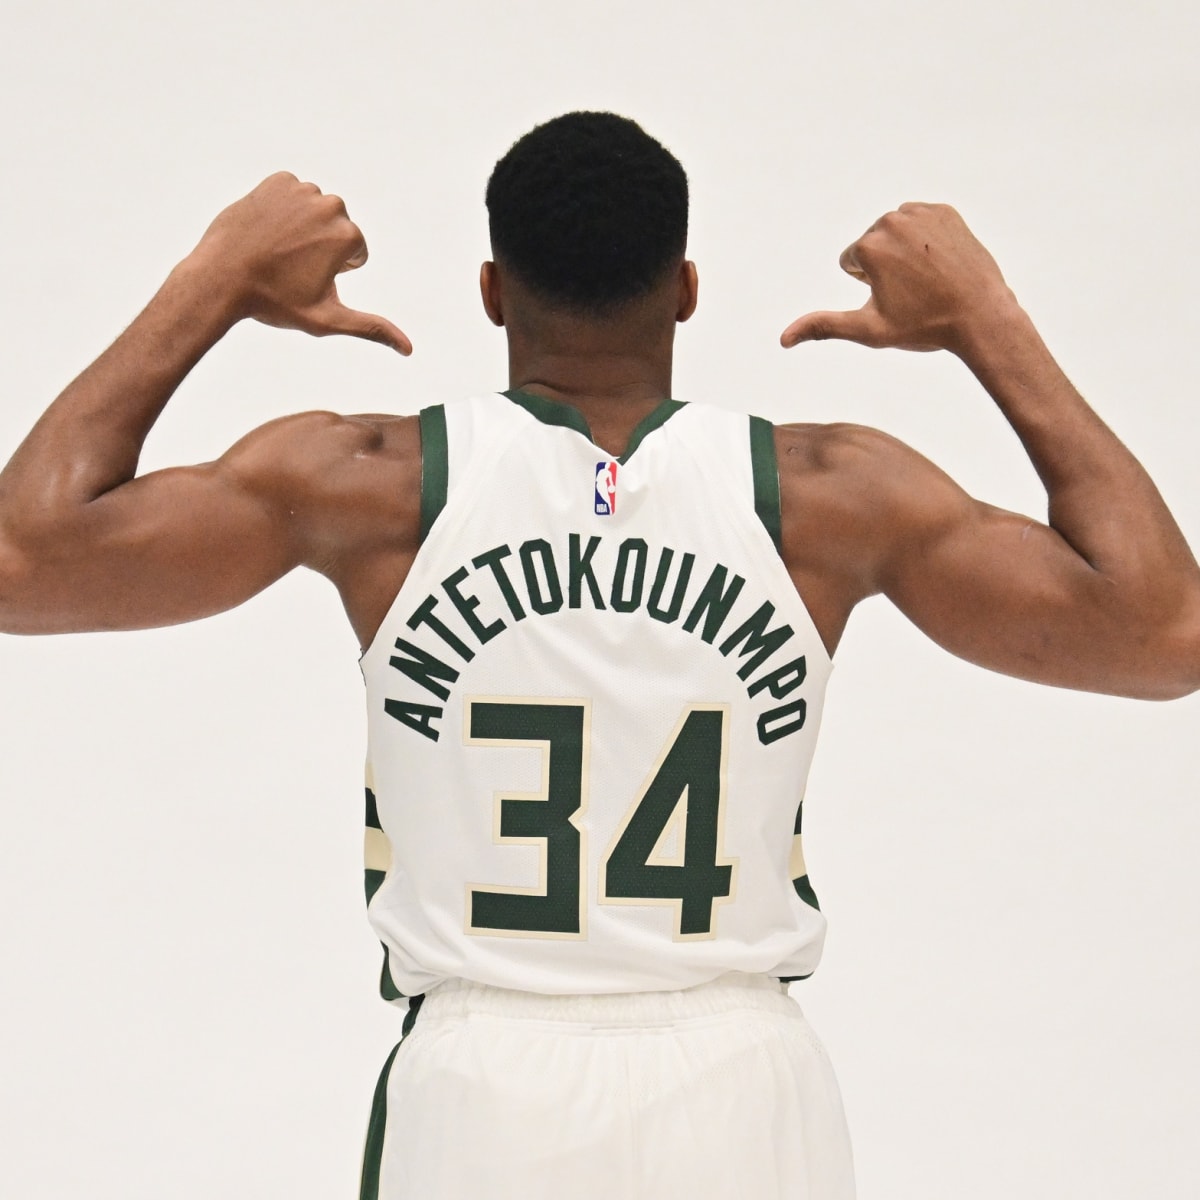 Milwaukee Bucks' addition of 7-time All-Star to roster generates